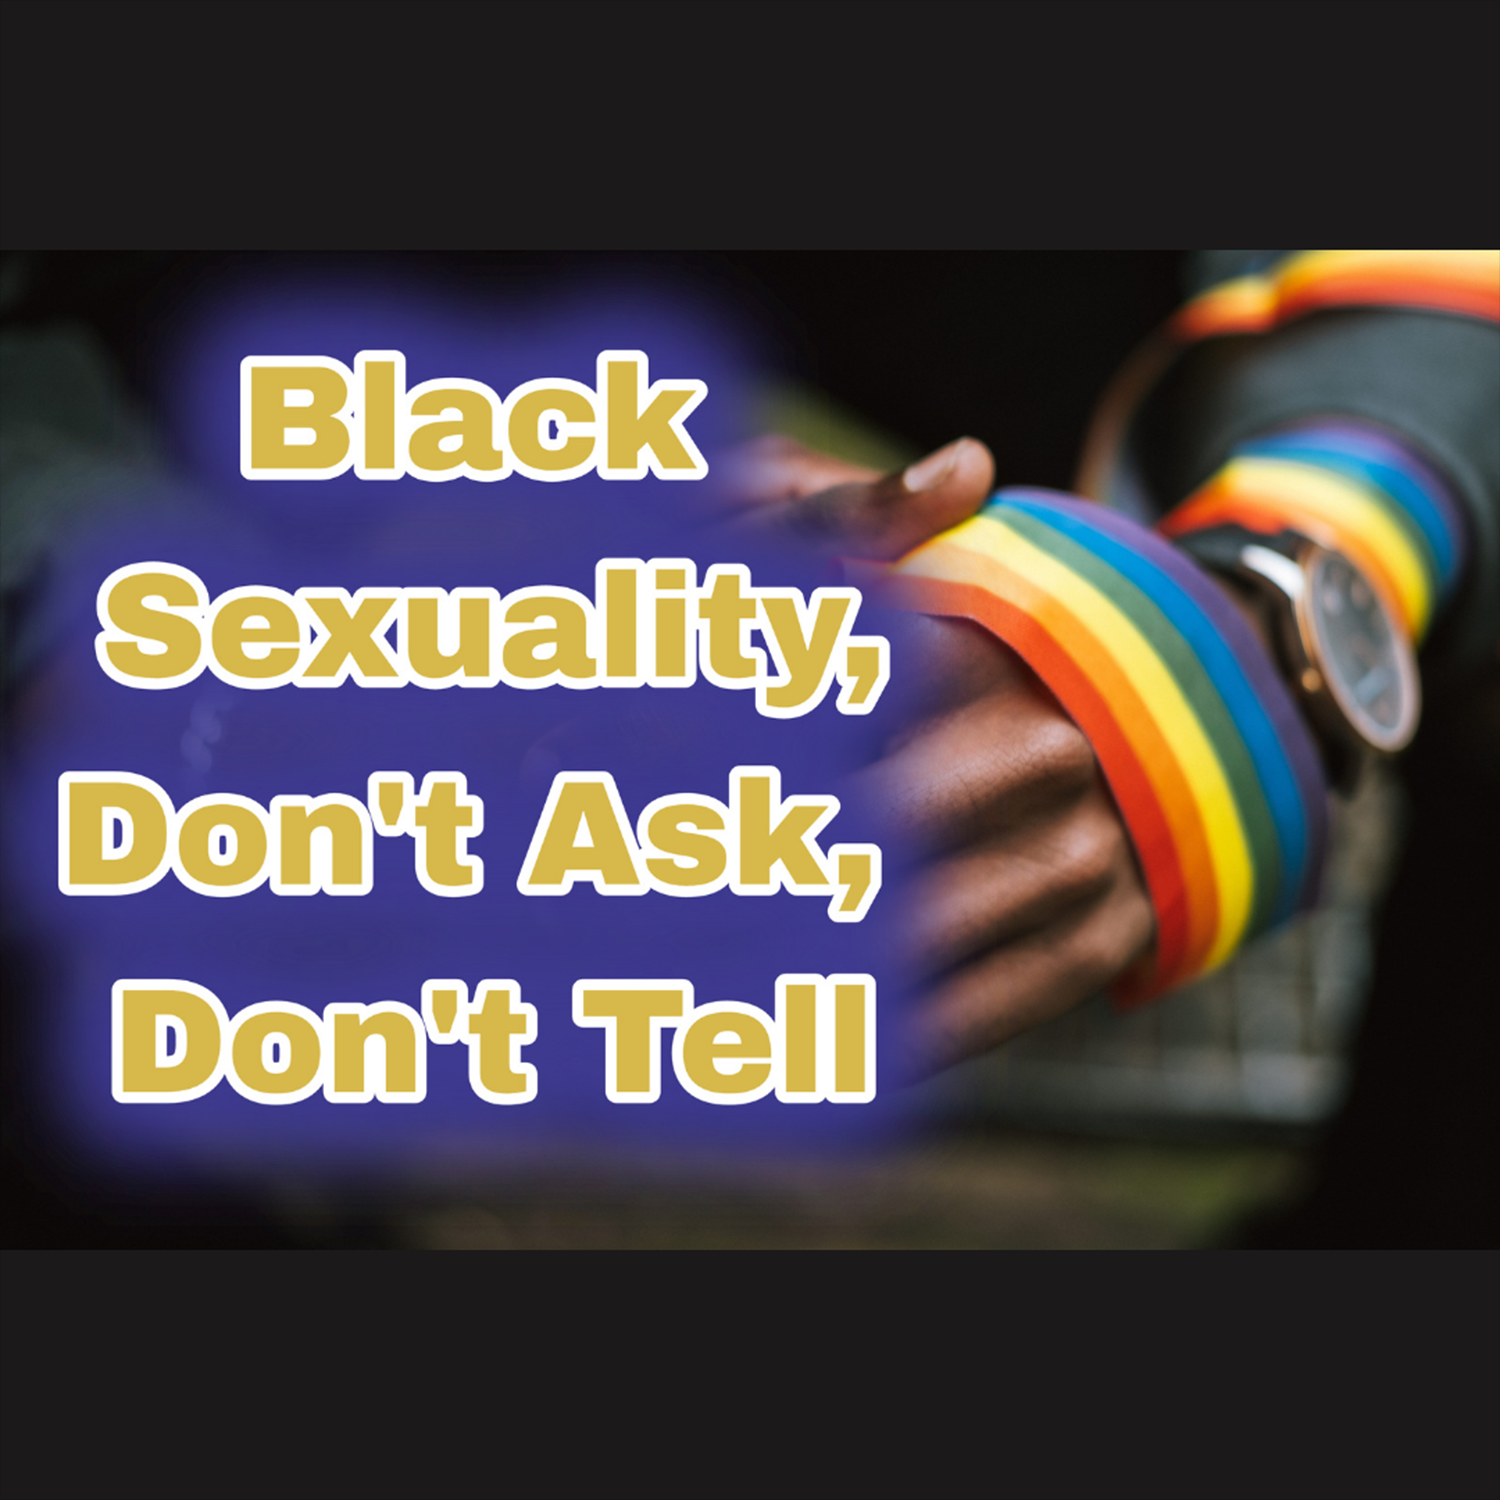 Black Sexuality: Don’t Ask Don’t Tell Image